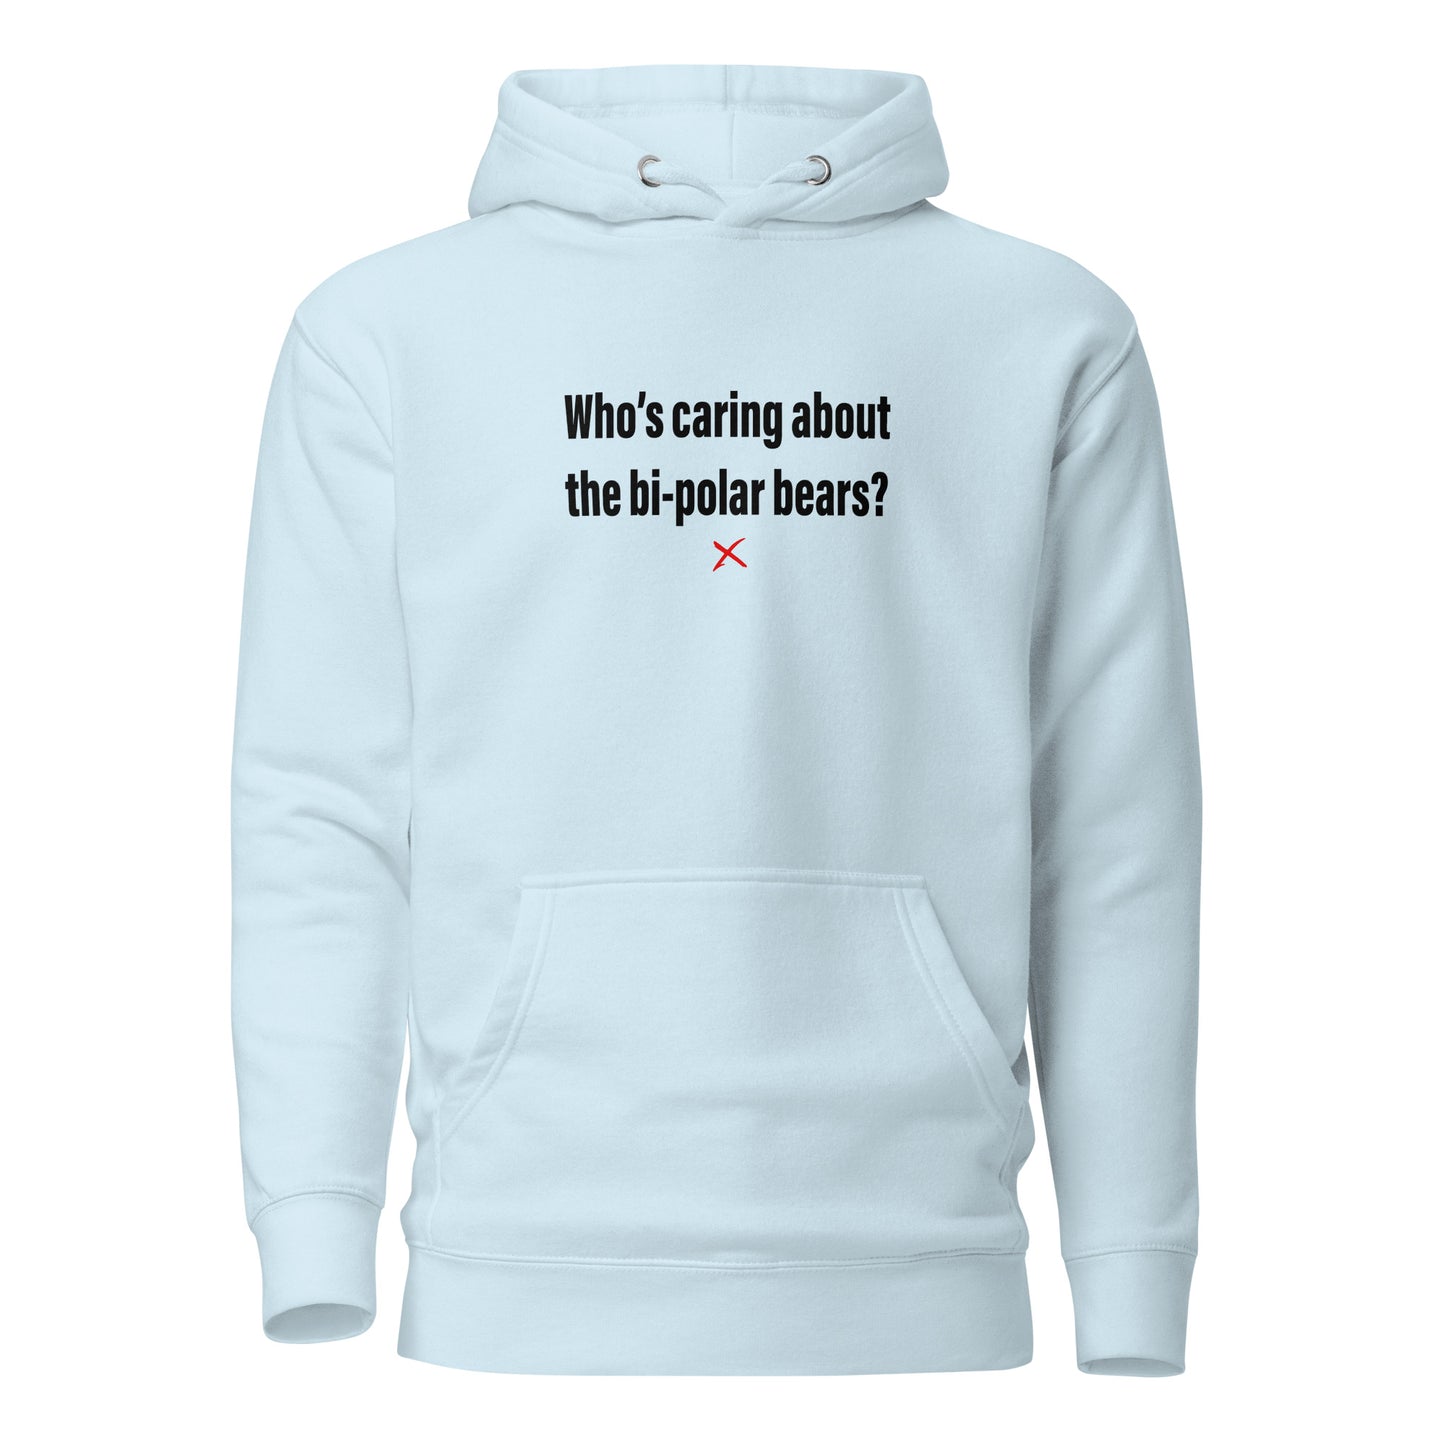 Who's caring about the bi-polar bears? - Hoodie